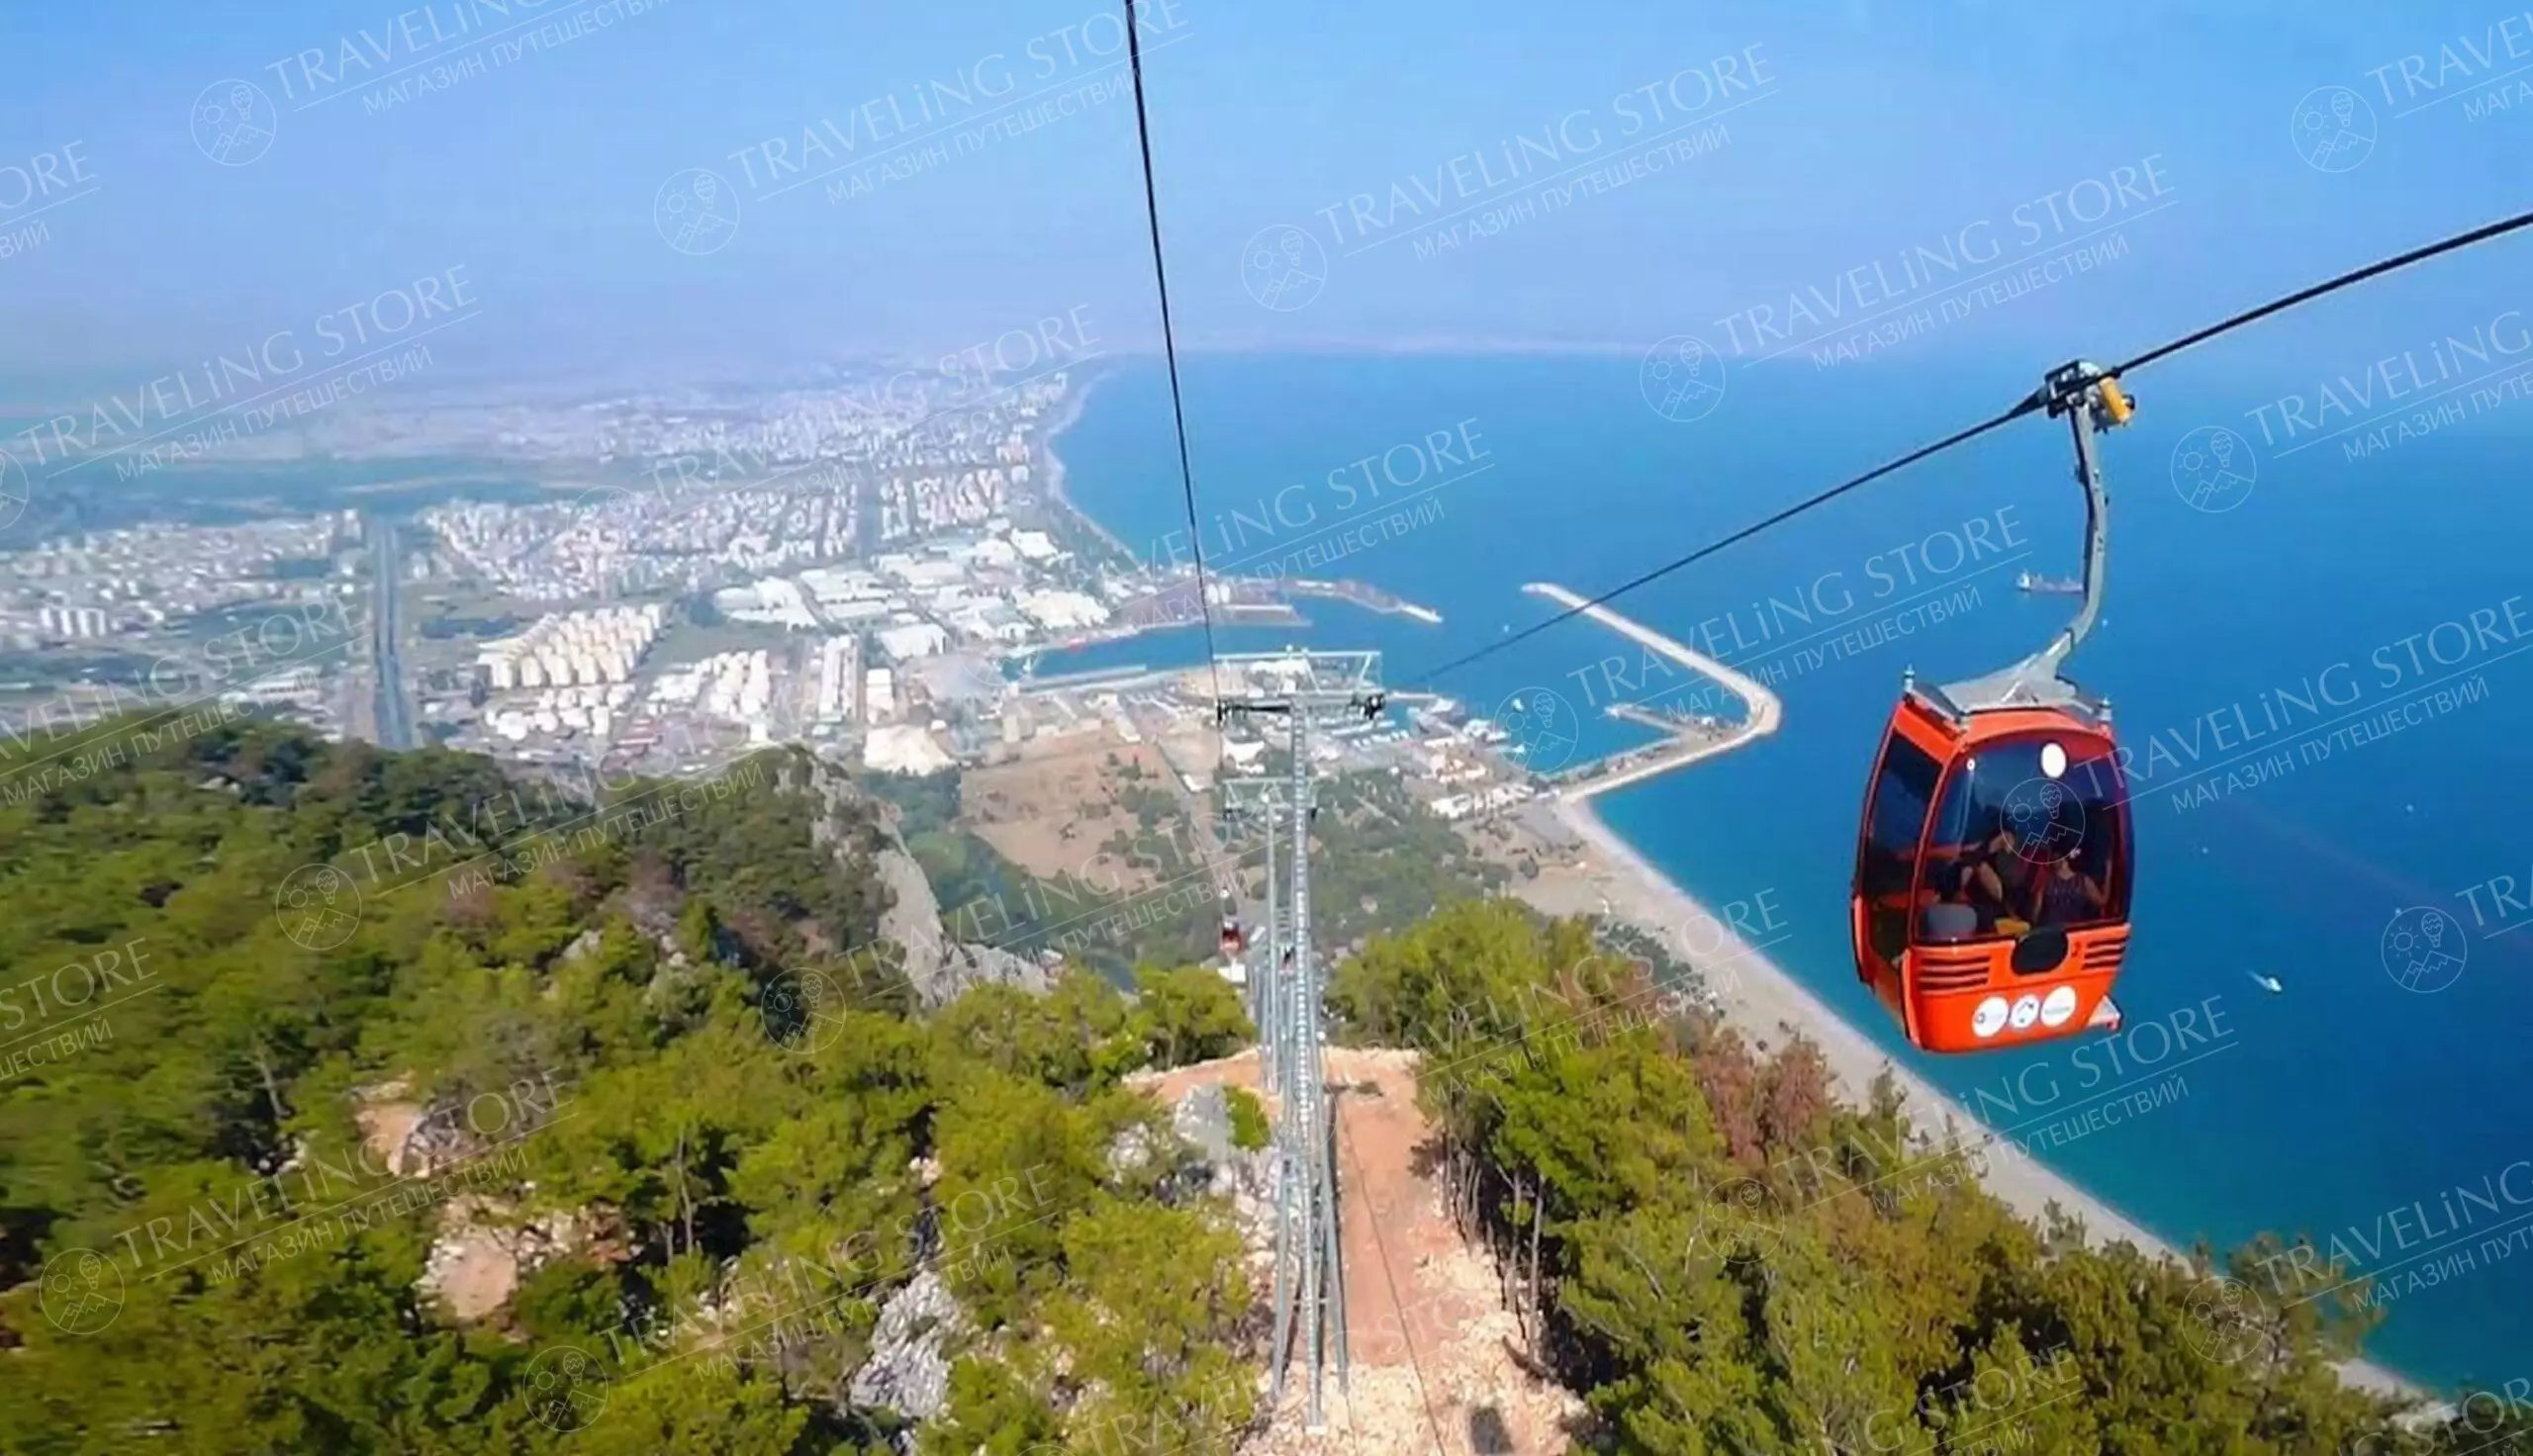 Antalya Overview Tour from Belek: beautiful nature and the Old City in 1 day